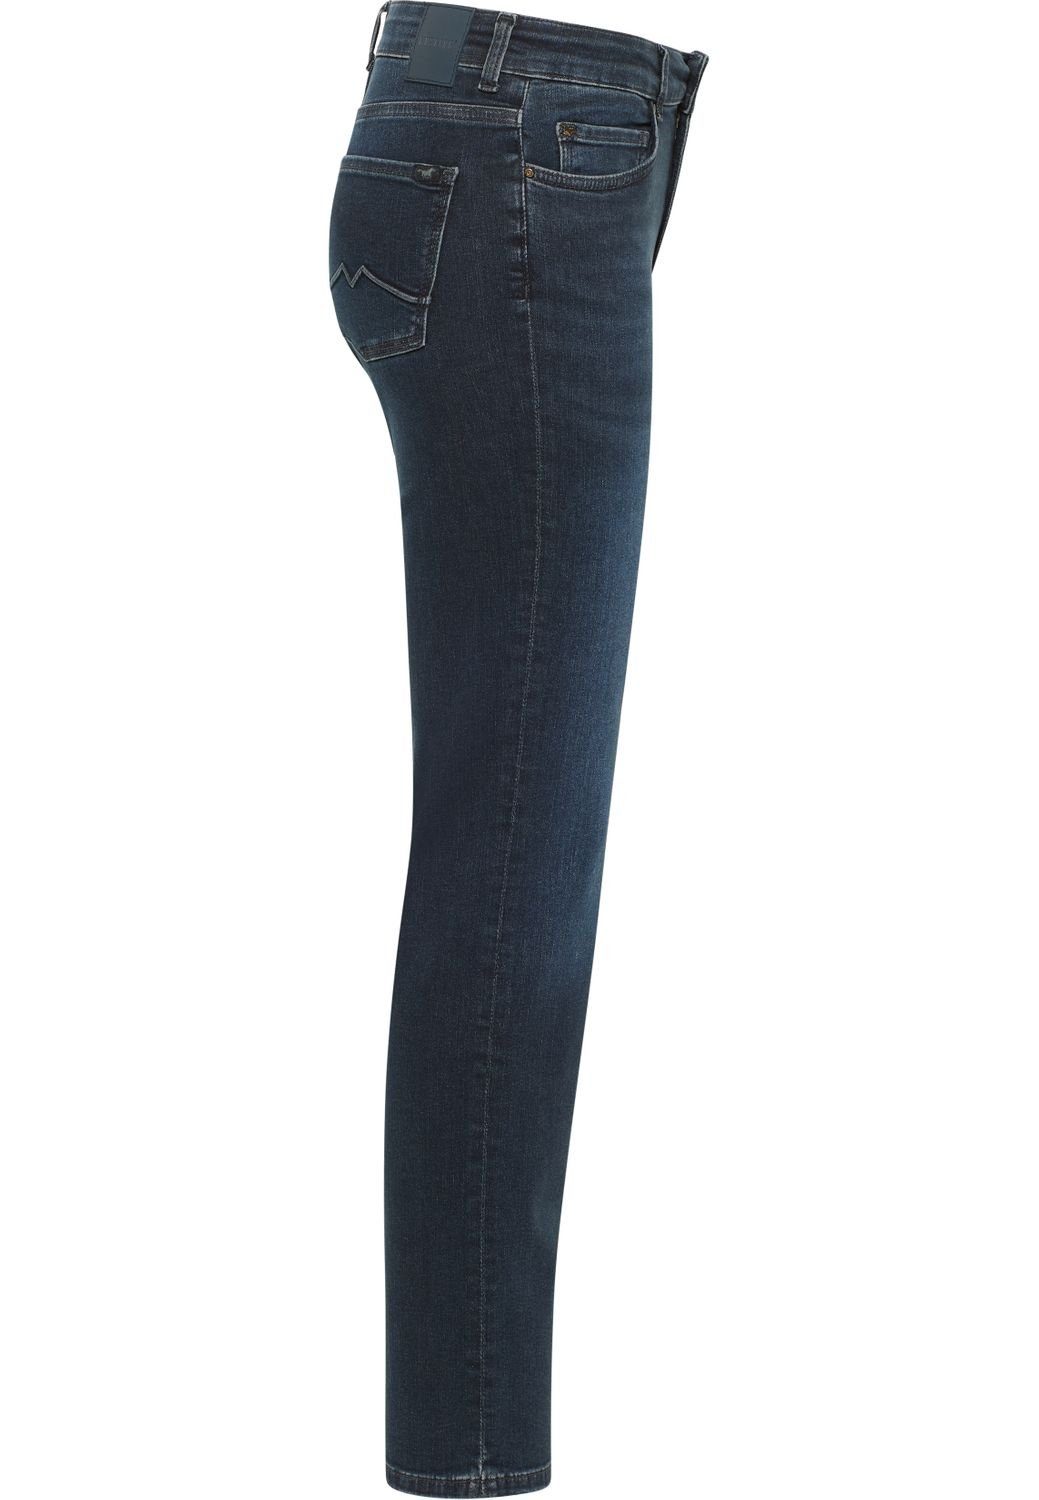 MUSTANG Relax-fit-Jeans Stretch CROSBY mit